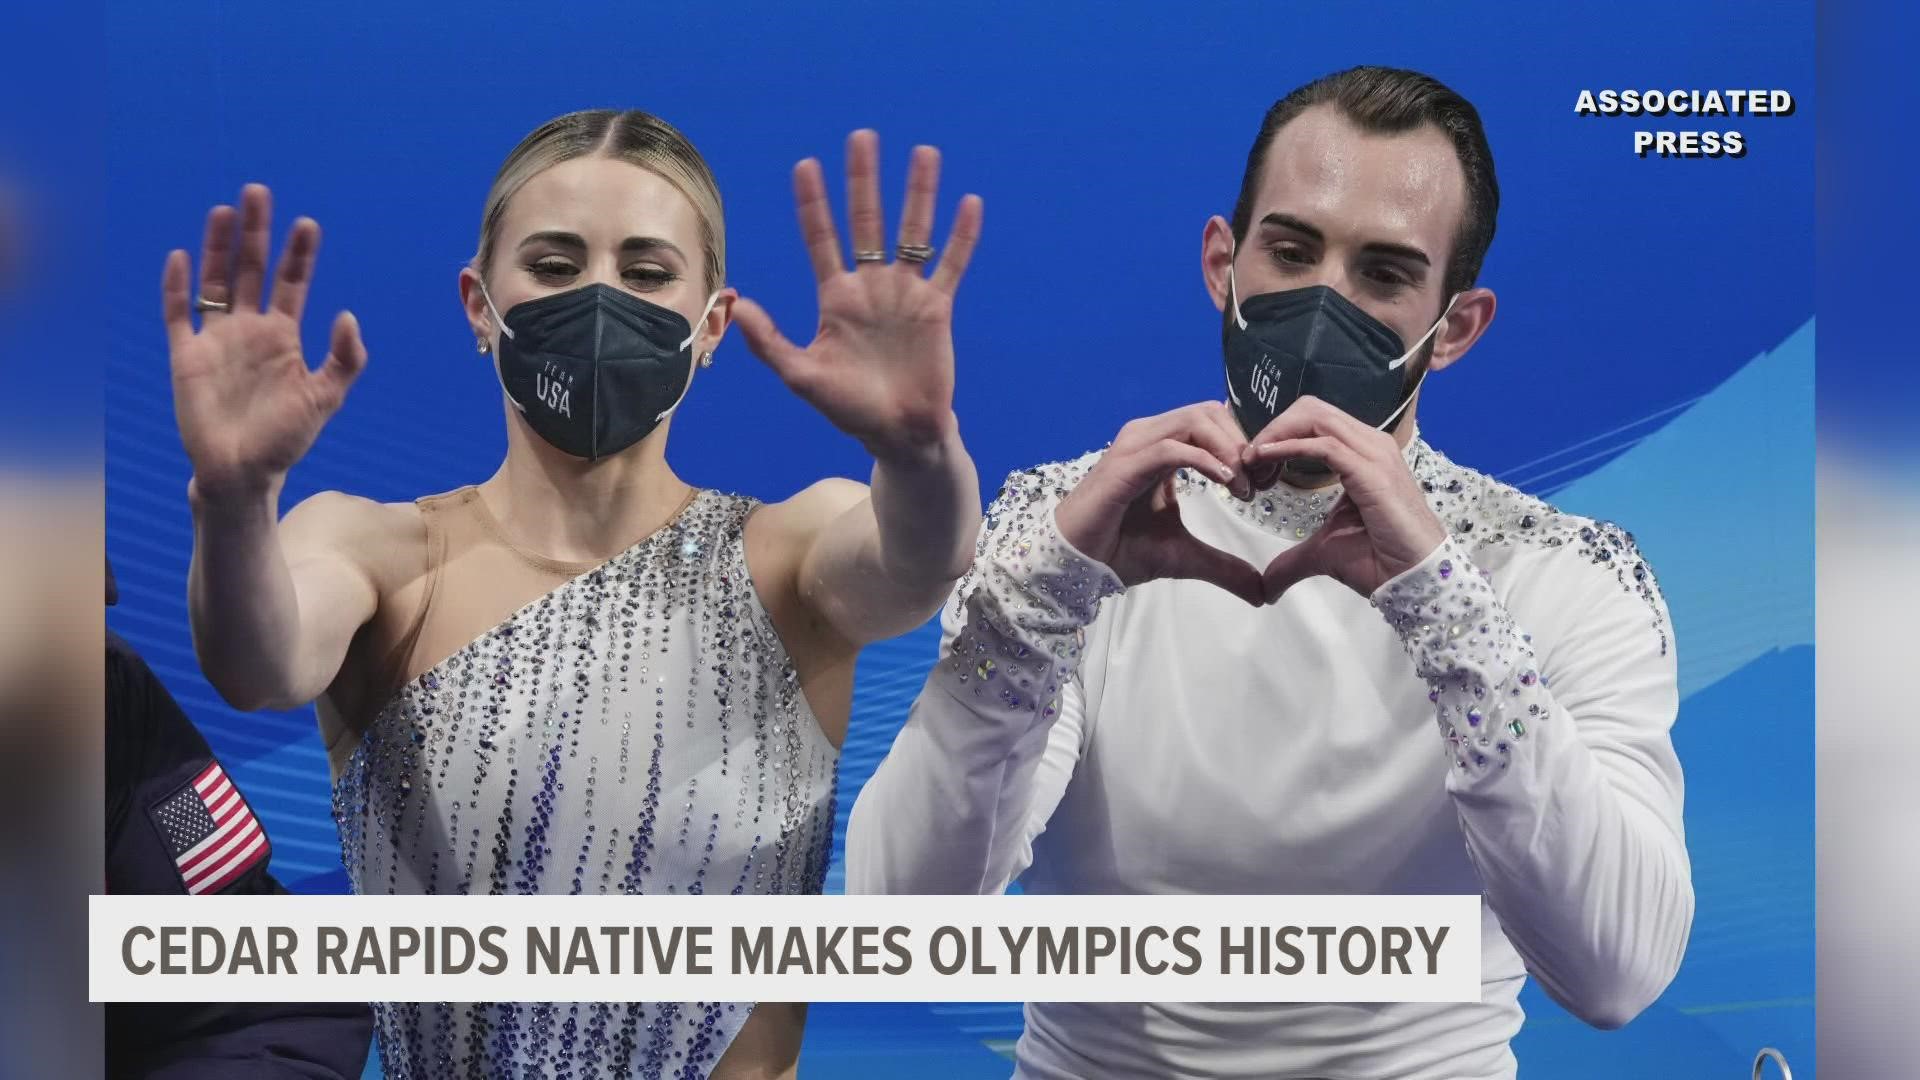 When Timothy LeDuc stepped on the ice for the pairs competition on Friday, they made Olympic history.